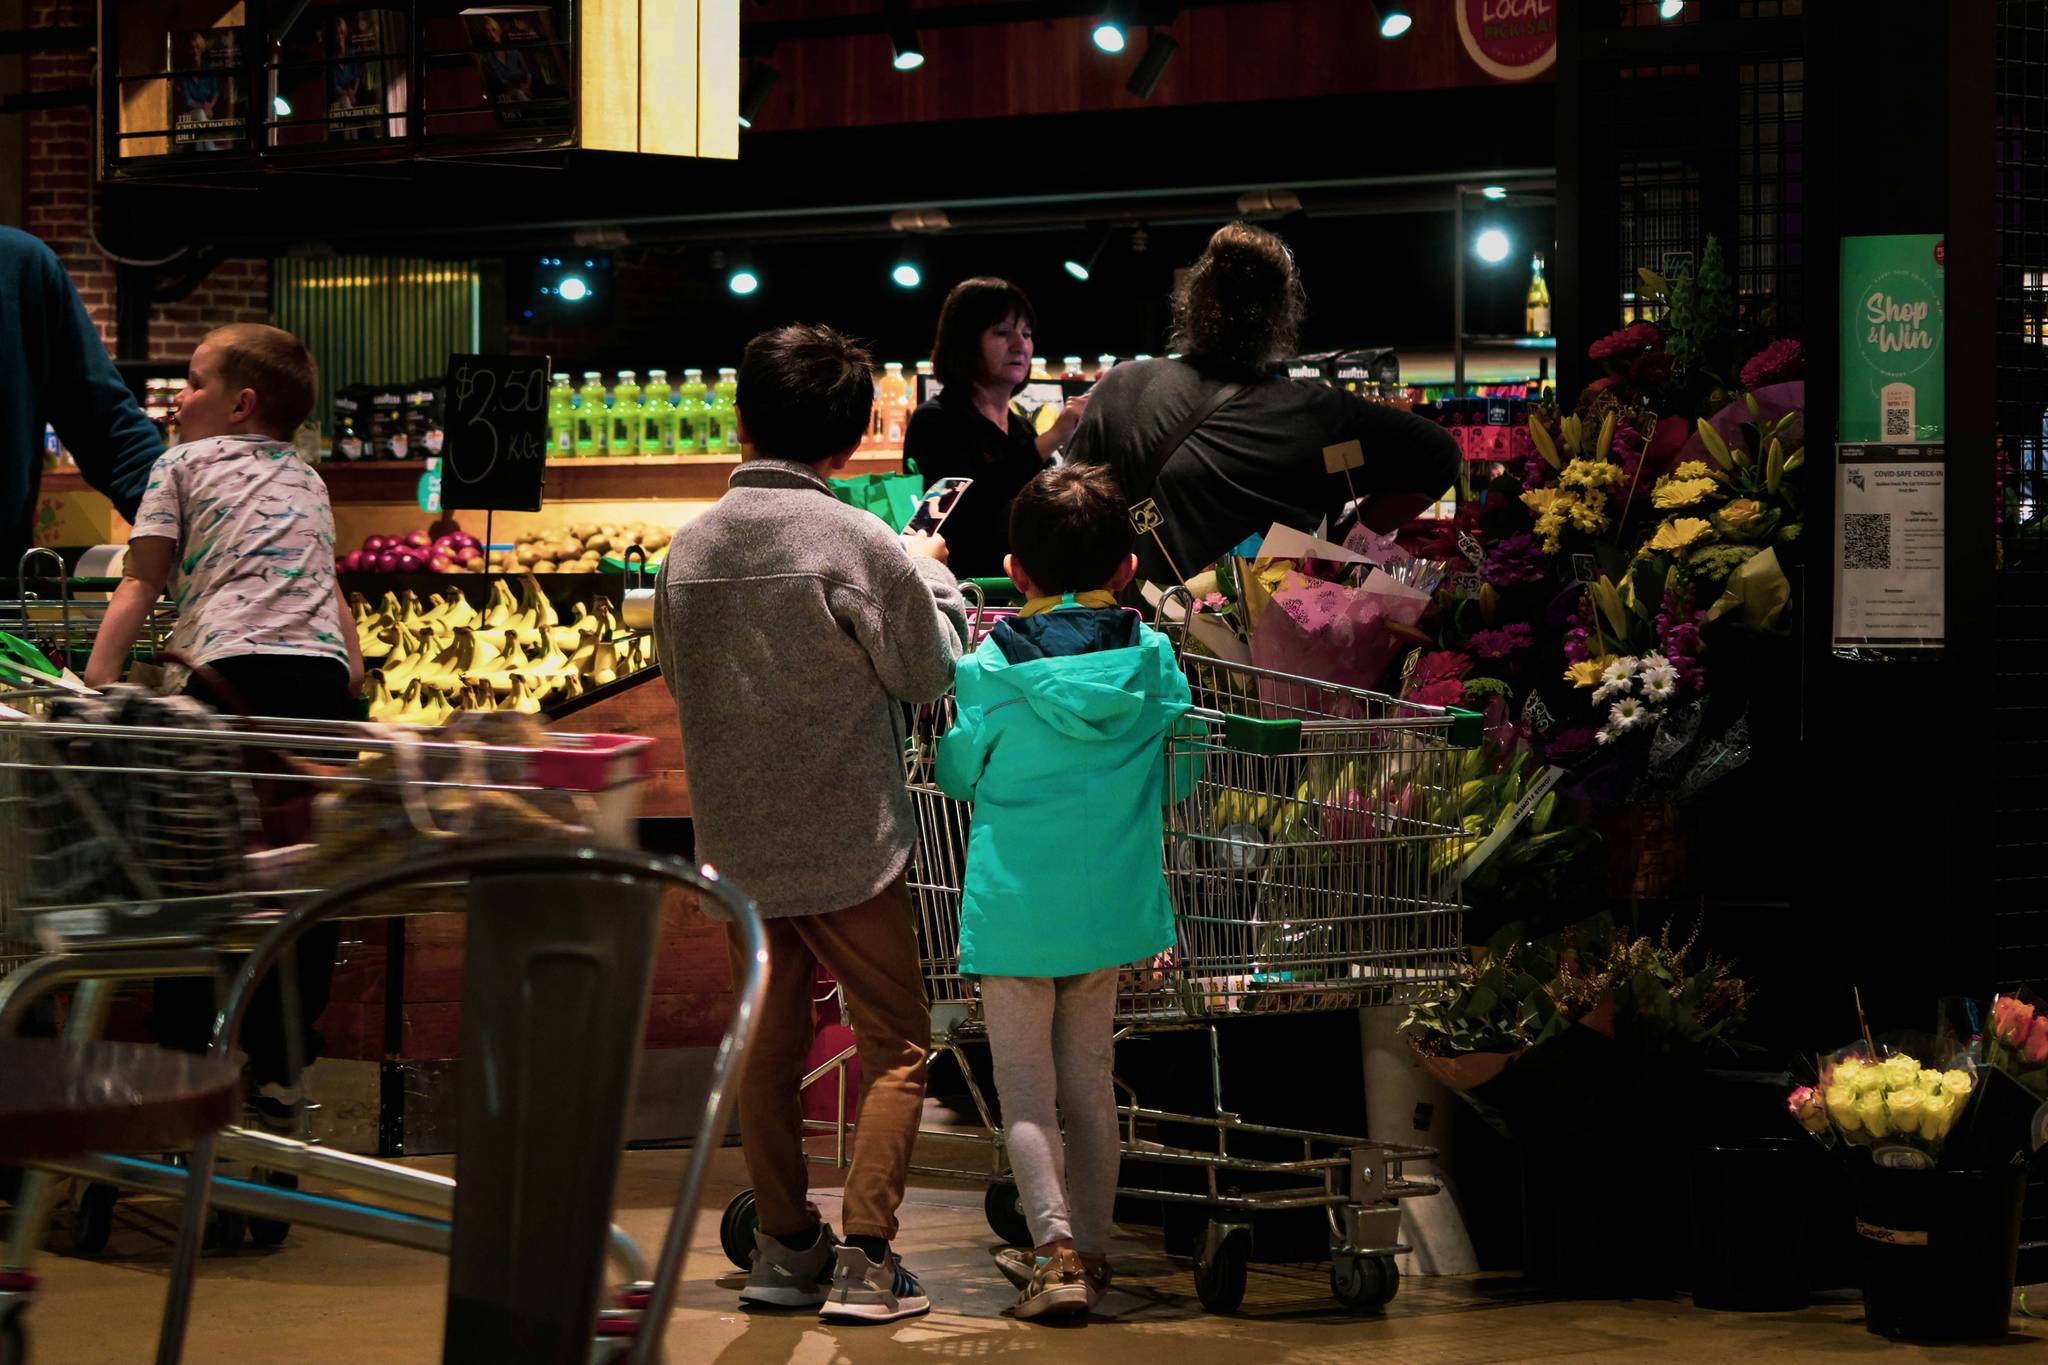 Behind the success of boutique grocery stores in Australia